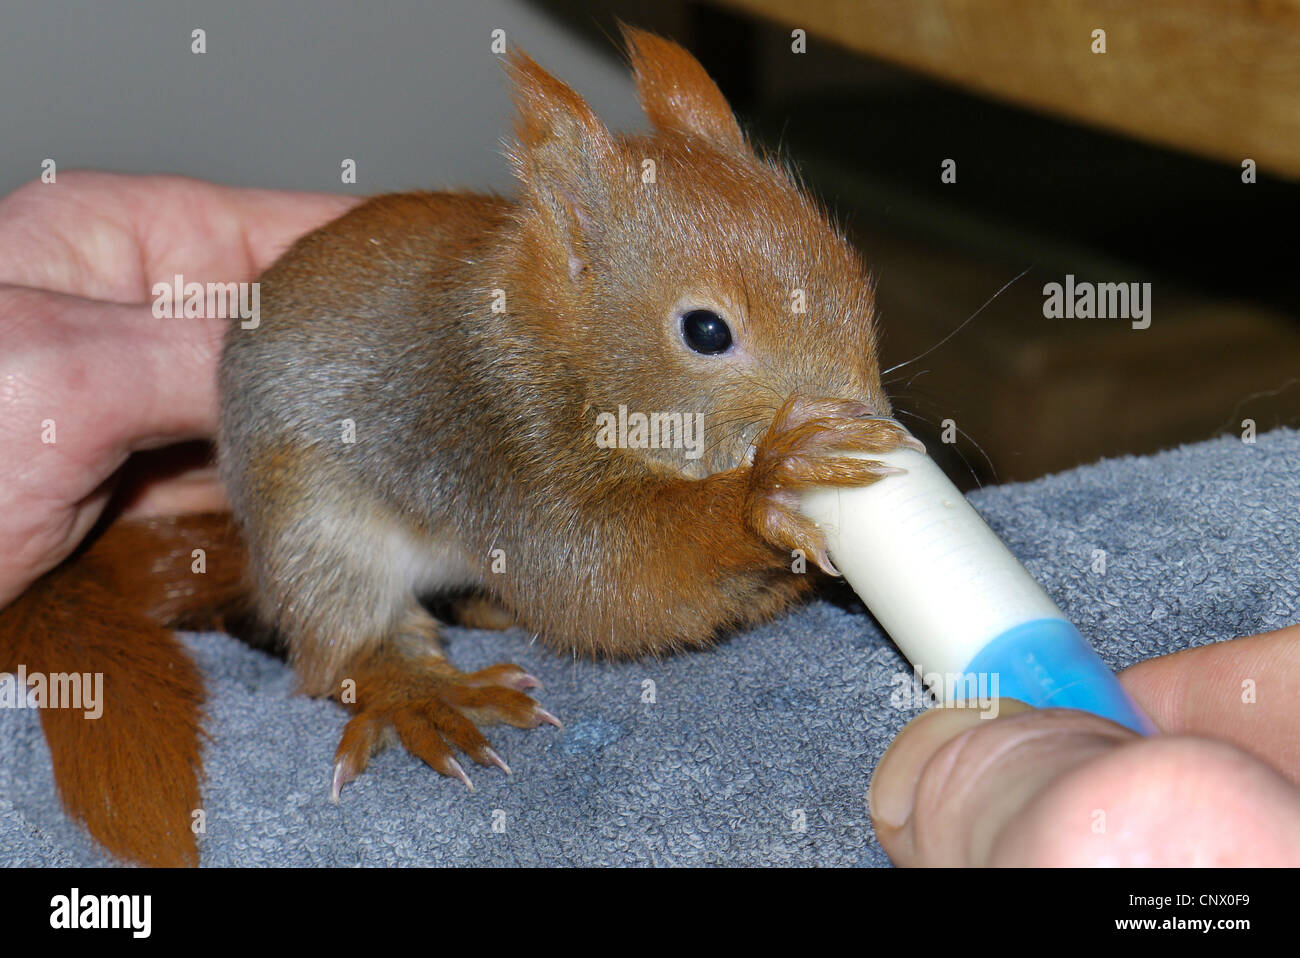 European red squirrel, Eurasian red squirrel (Sciurus vulgaris), ophaned pup rearing by hand with milk from a injection, Germany Stock Photo